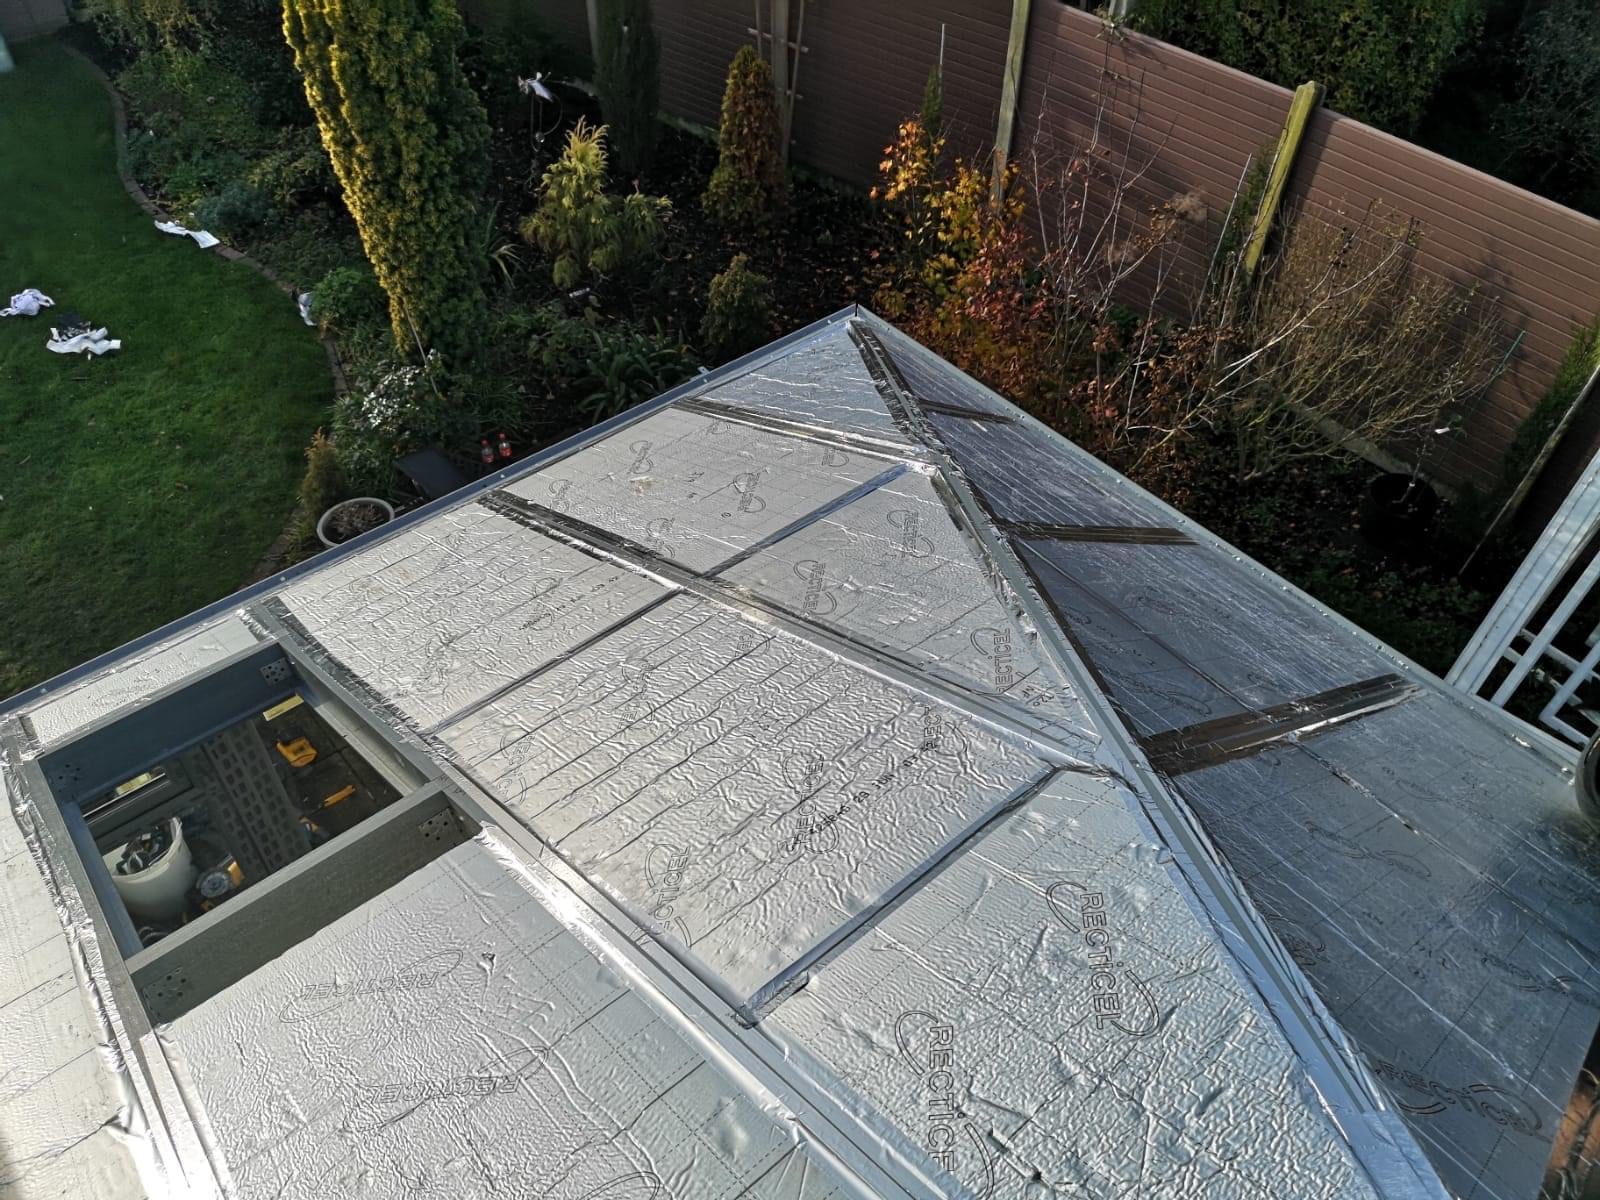 Conservatory roof without tiles in garden